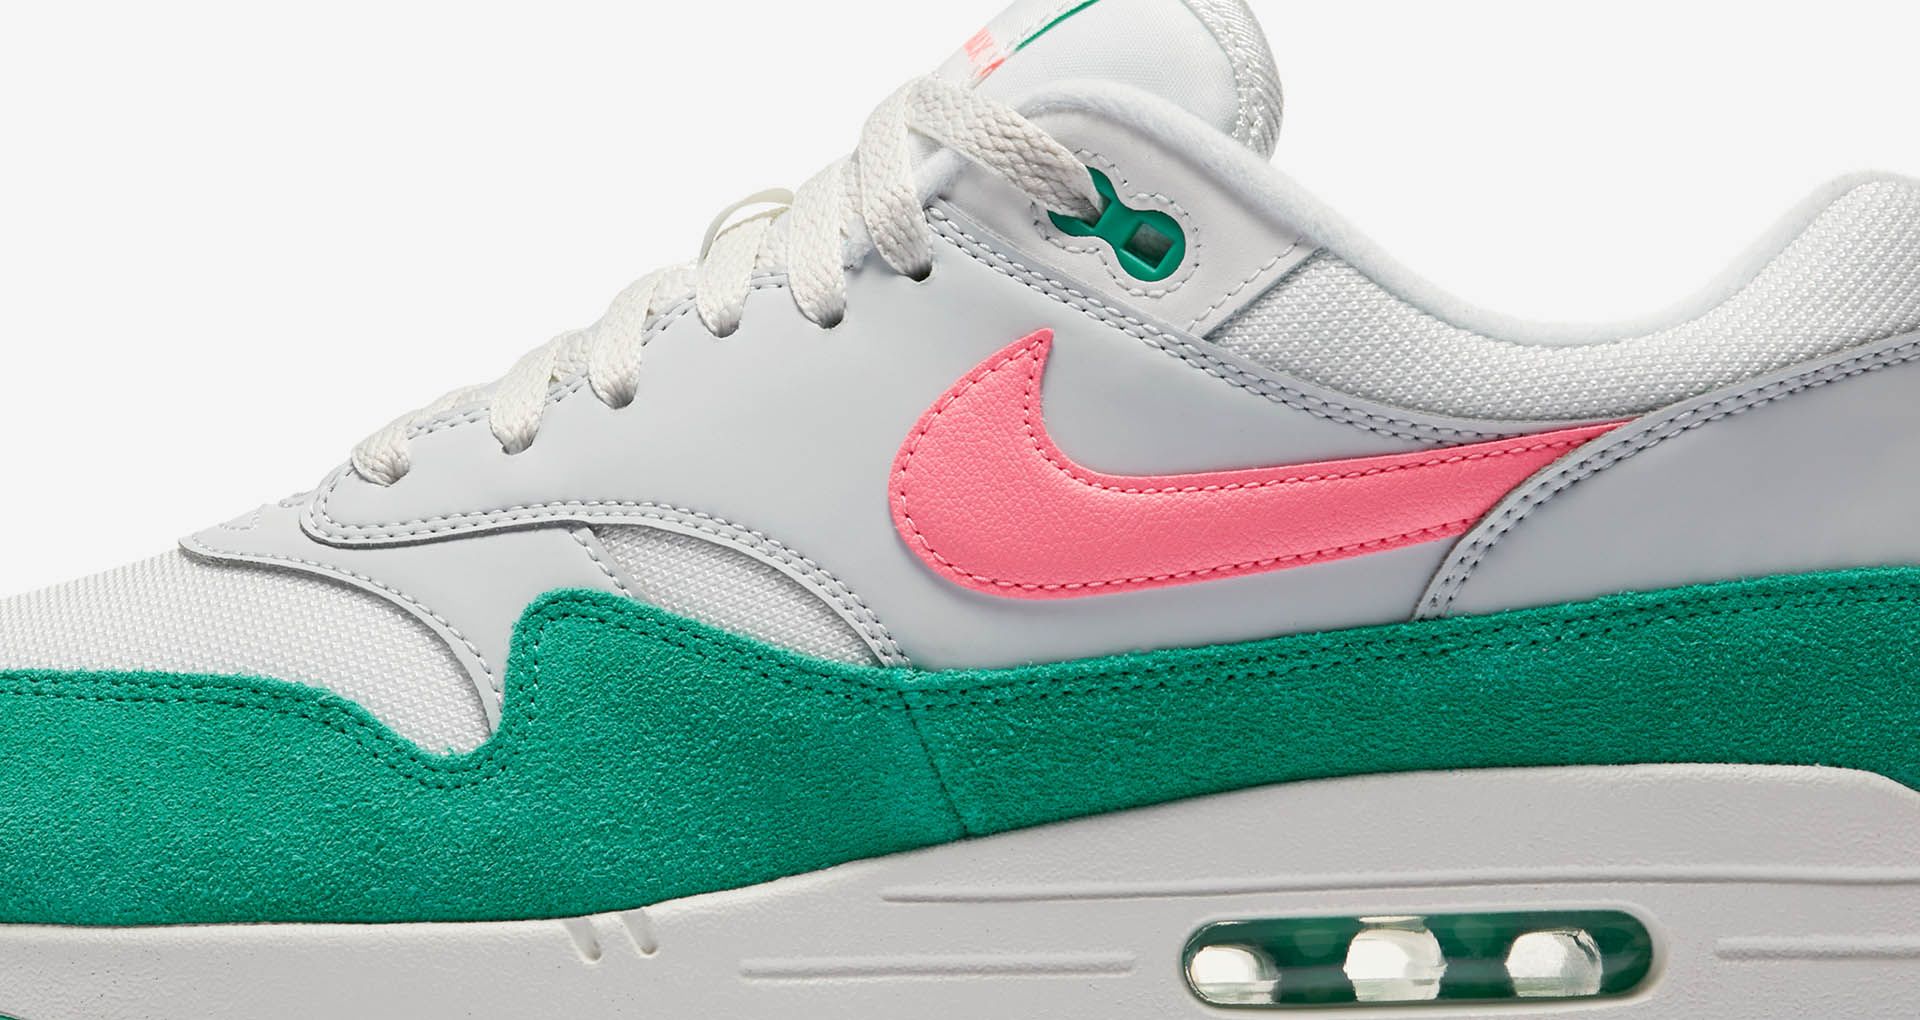 Nike Air Max 1 'Summit White & Sunset Pulse' Release Date. Nike SNKRS GB